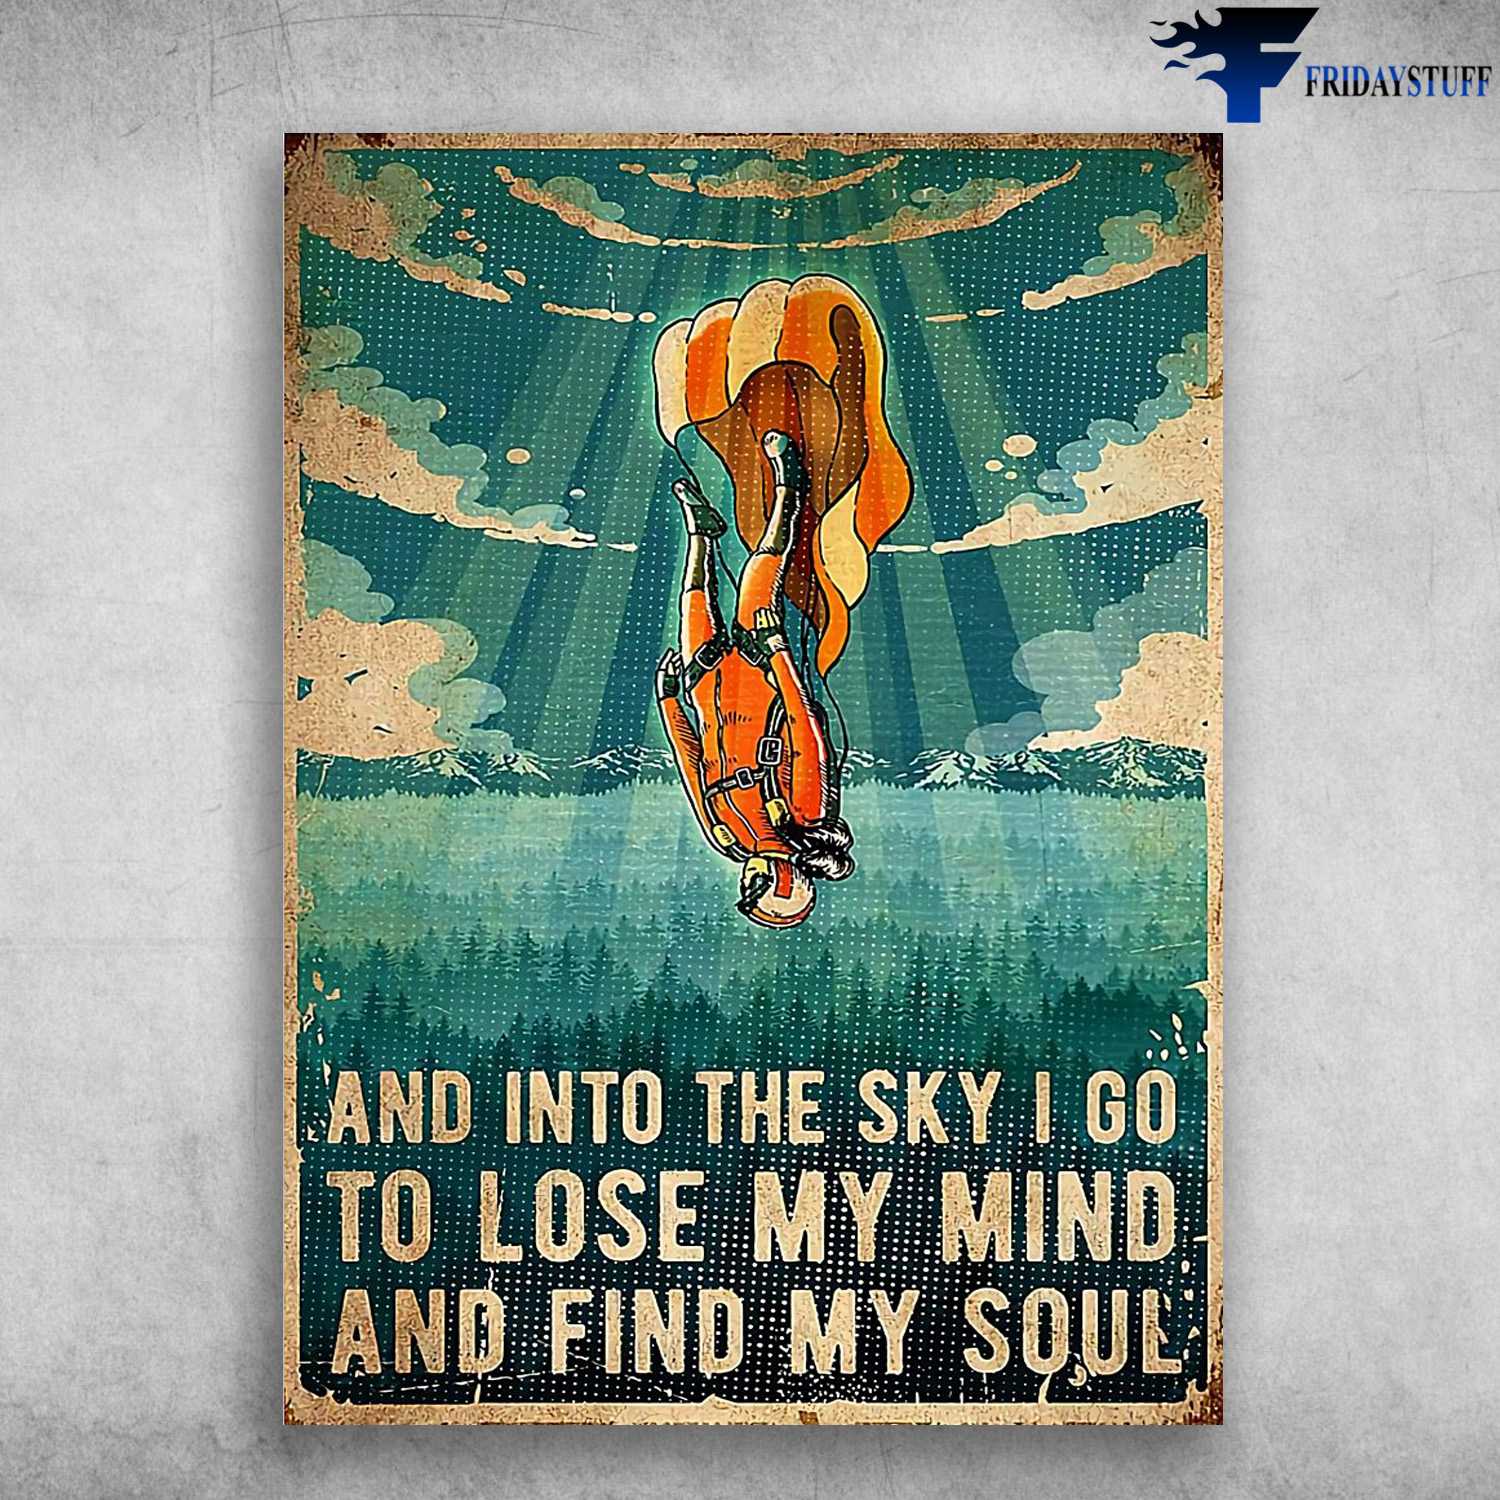 Skydiving Man, Skydiving Poster, And Into The Sky, I Go To Lose My Mind, And Find My Soul